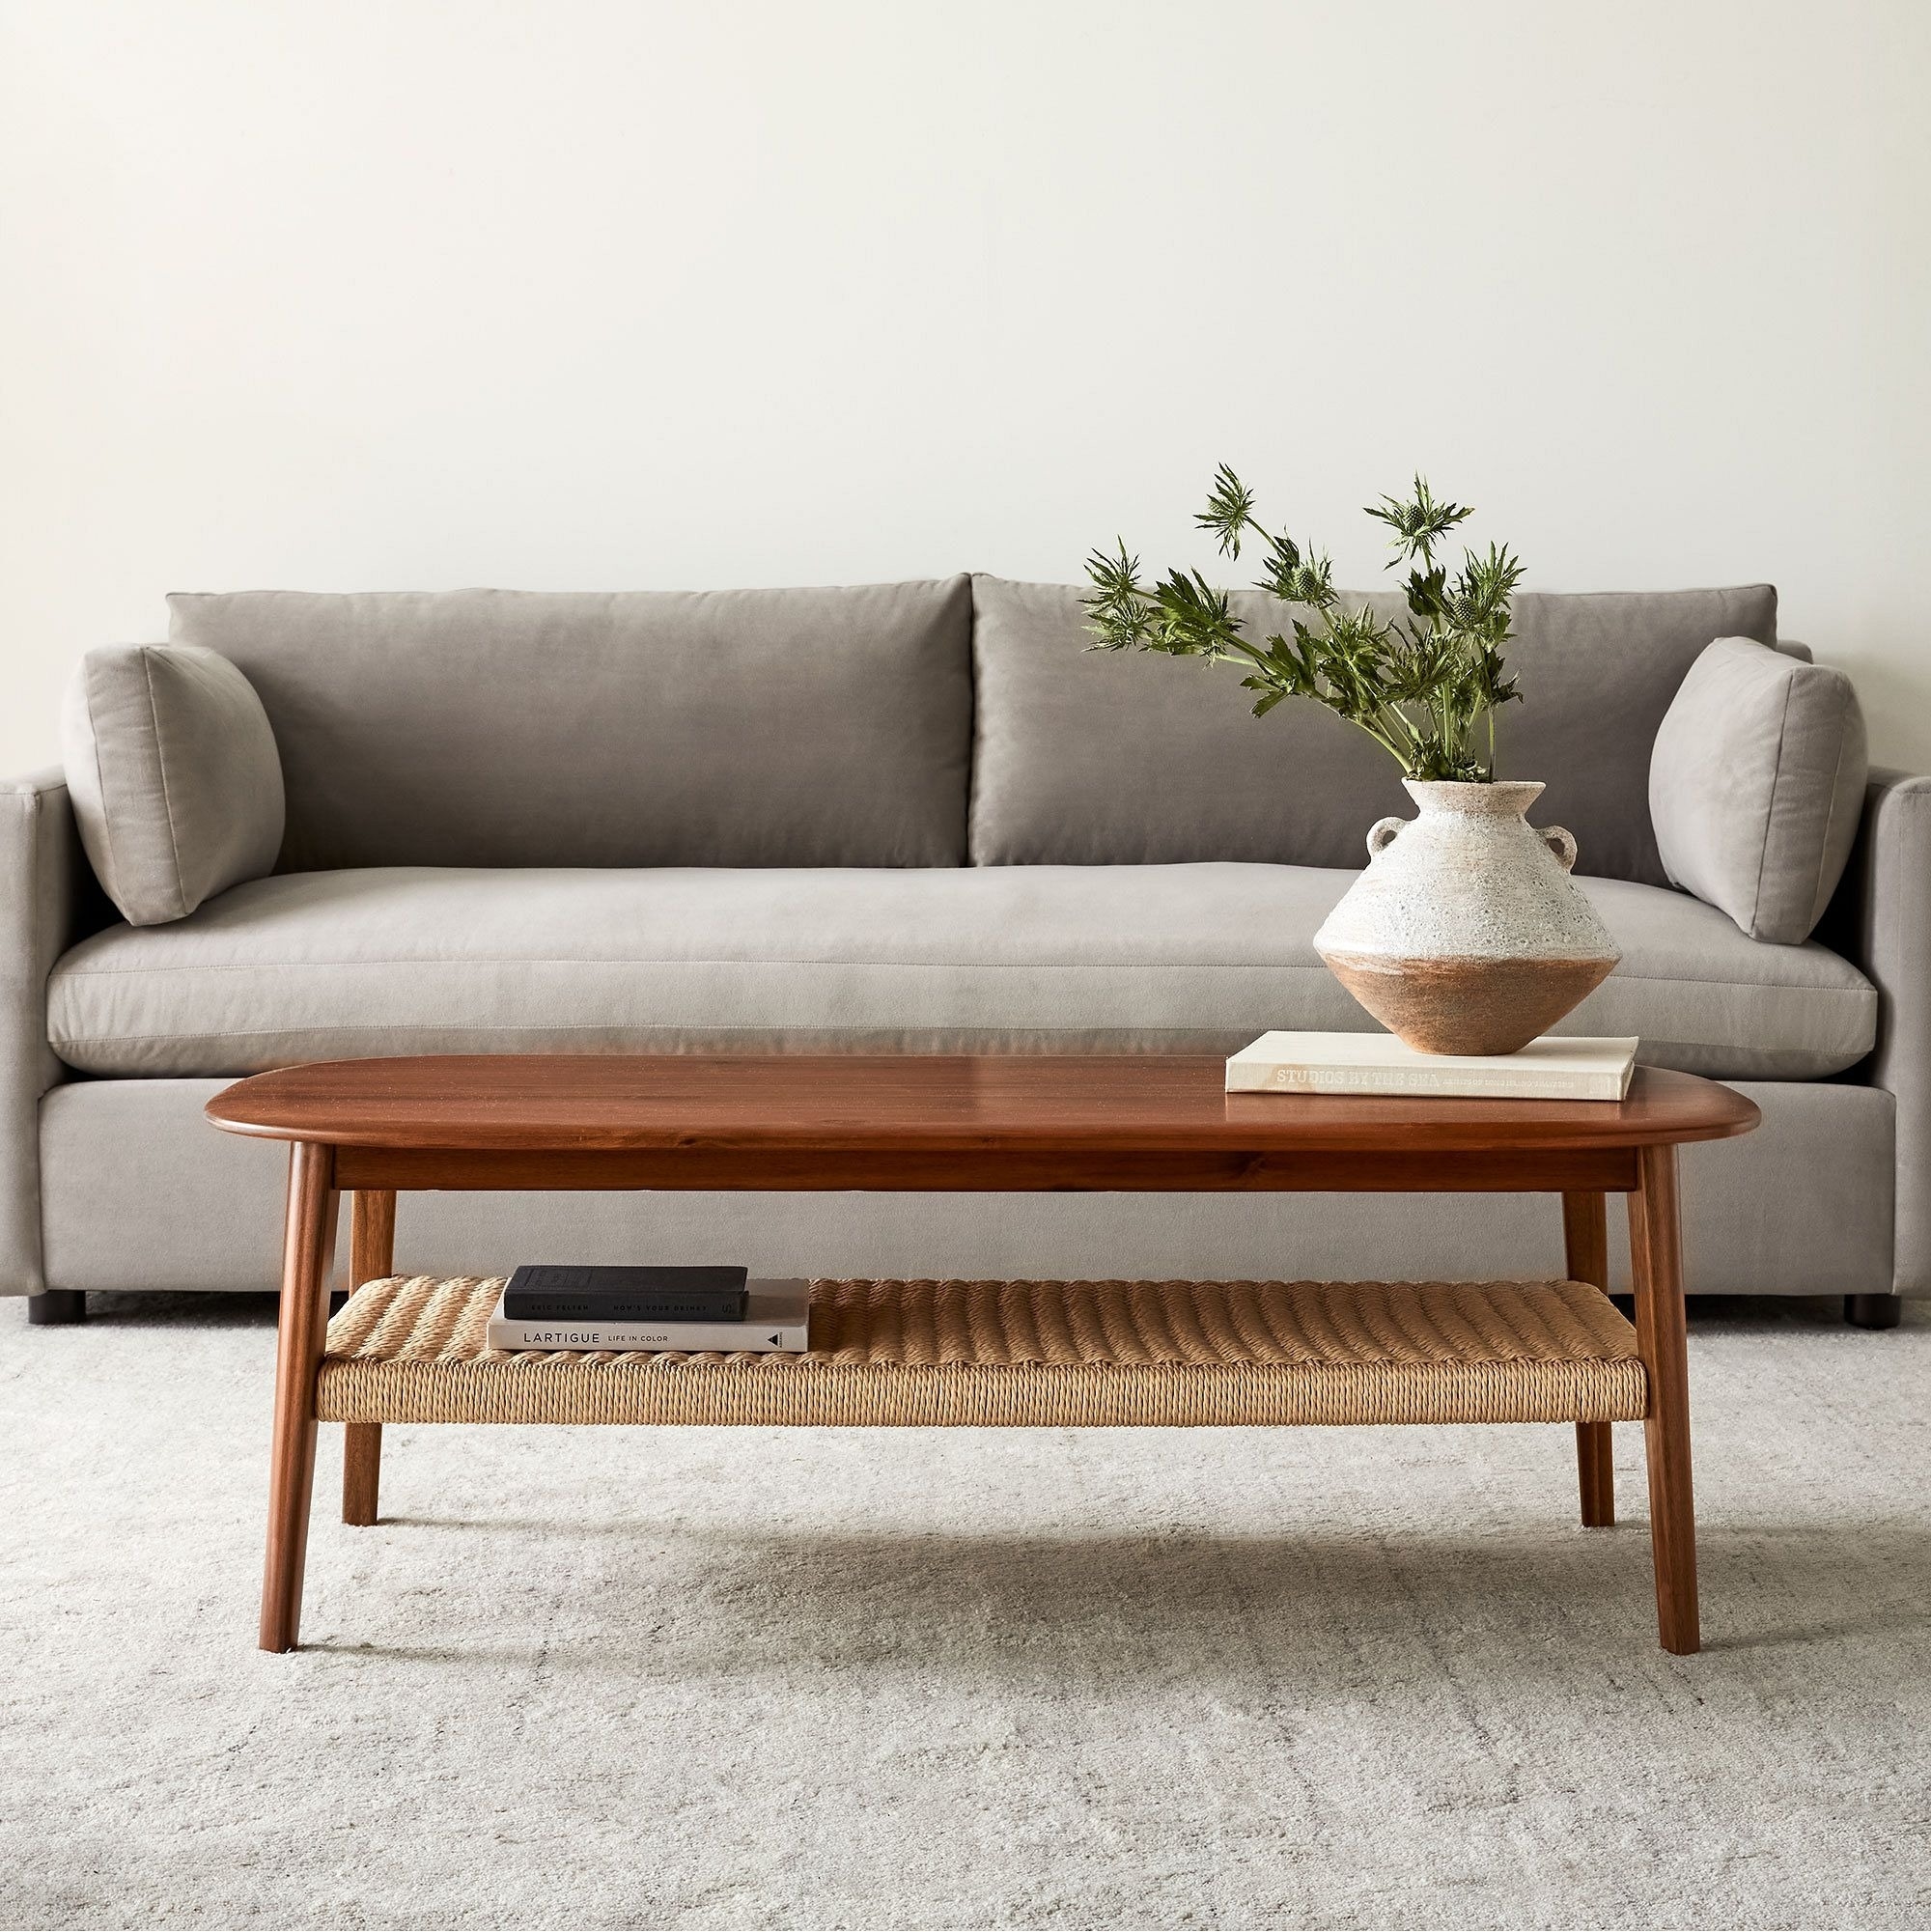 A neutral-toned sofa with a wooden coffee table displaying a vase, books, and a decorative tray in a living room